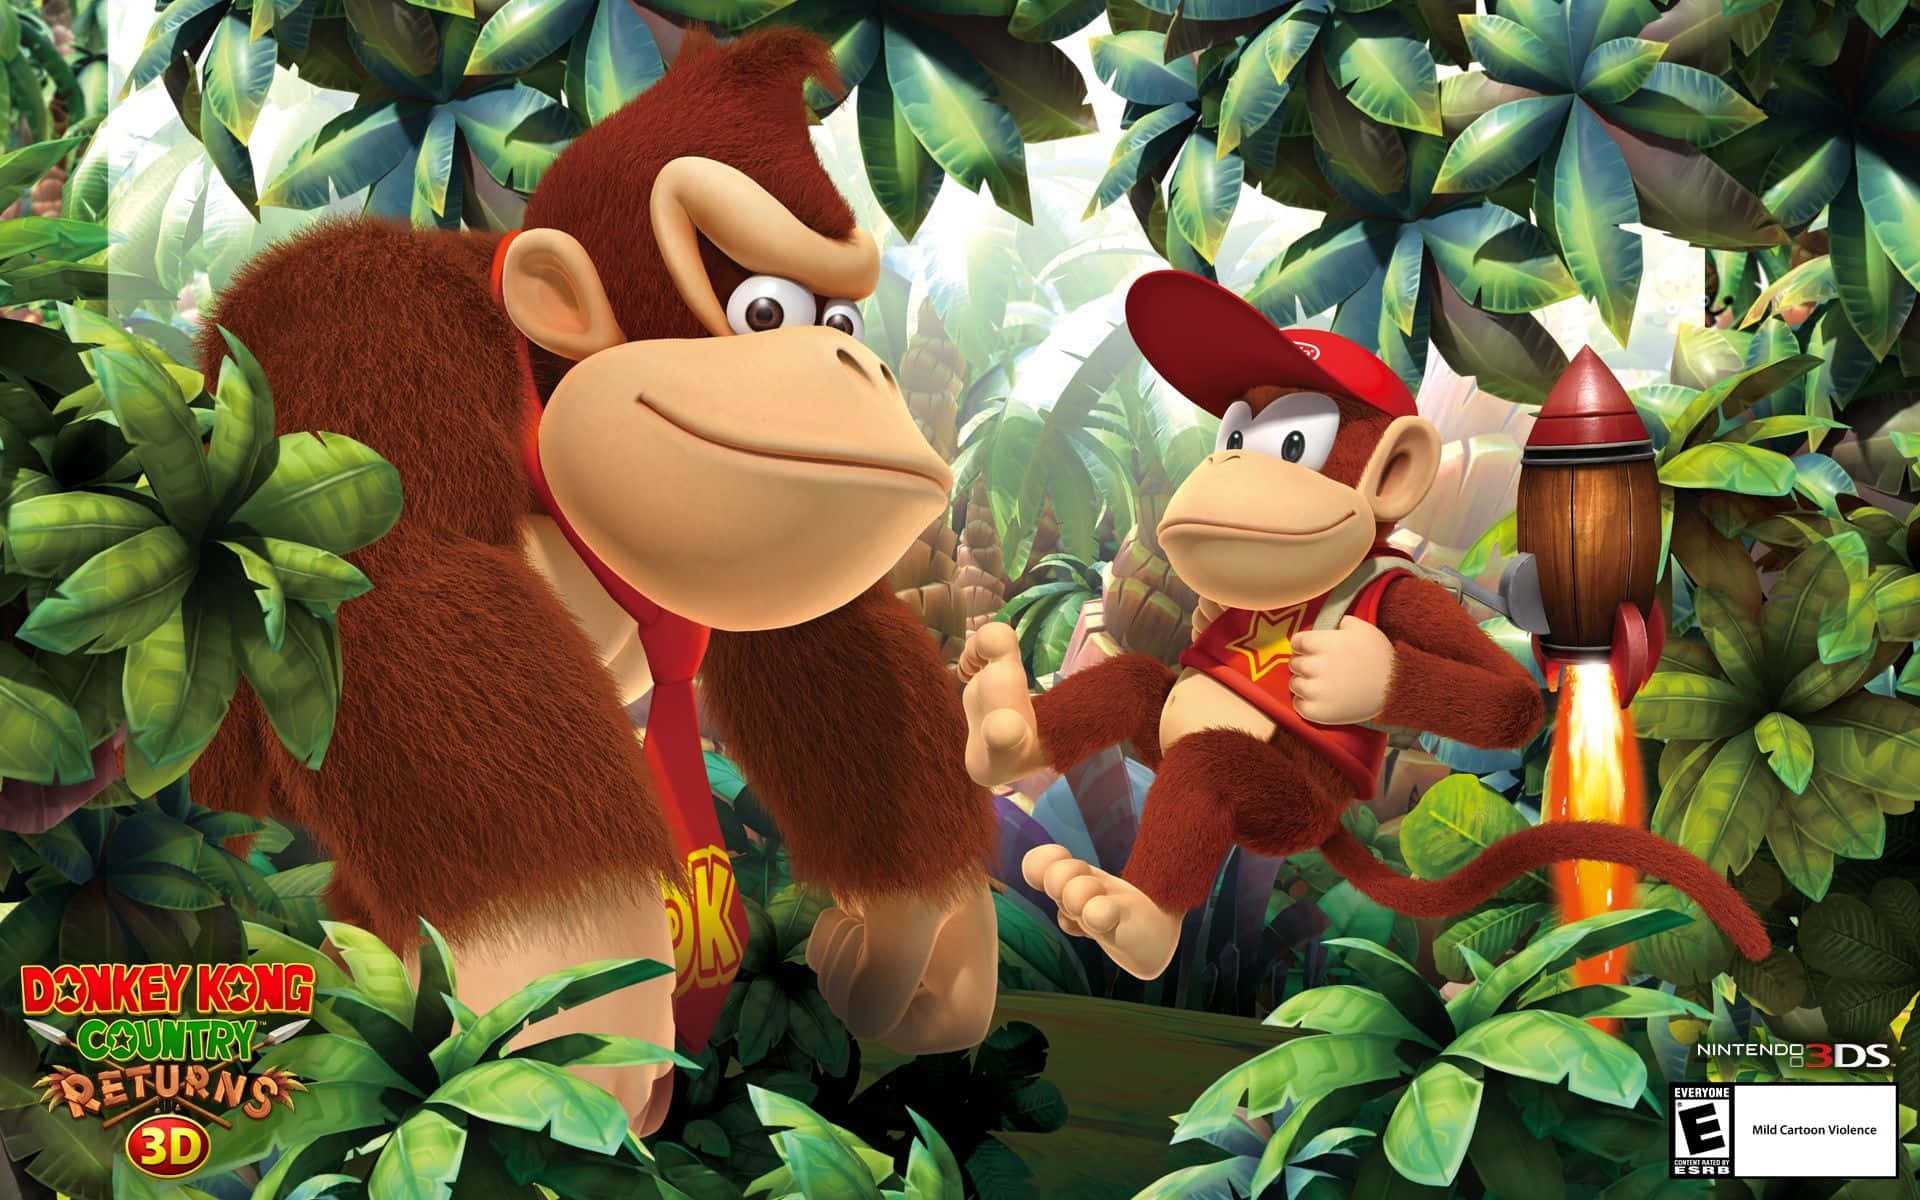 Caption: Donkey Kong In Athletic Action